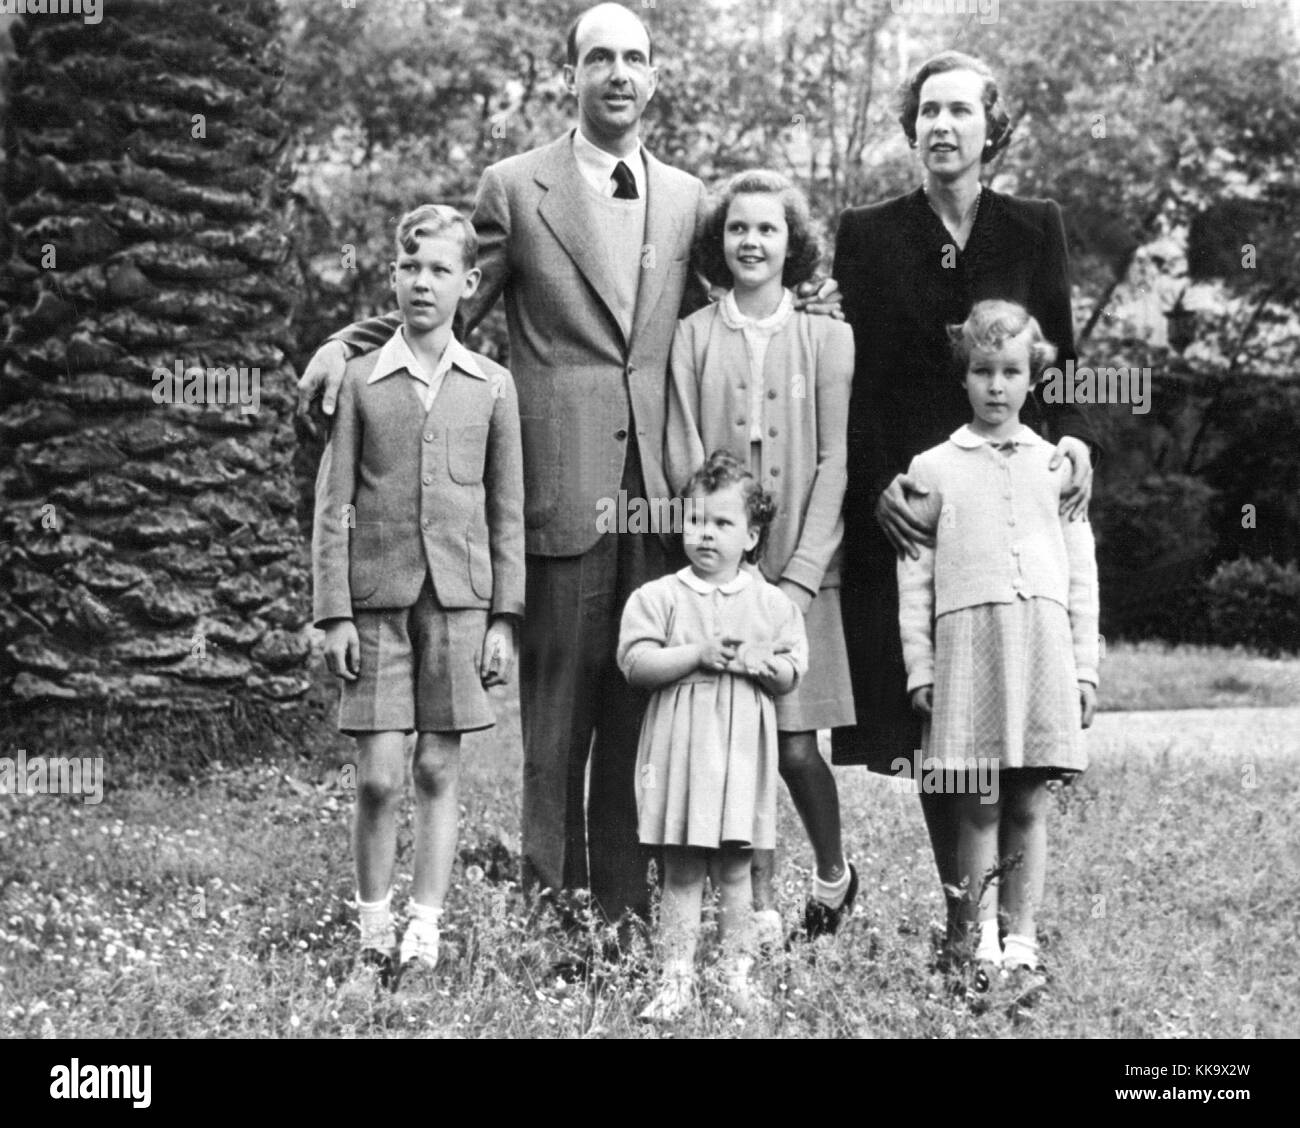 King Umberto II of Italy with his wife and children Prince Victor Emanuel, on the left, princess Maria Pia, princess Maria Beatrice and princess Maria Gabriella, on the left, pictured in spring 1946. | usage worldwide Stock Photo